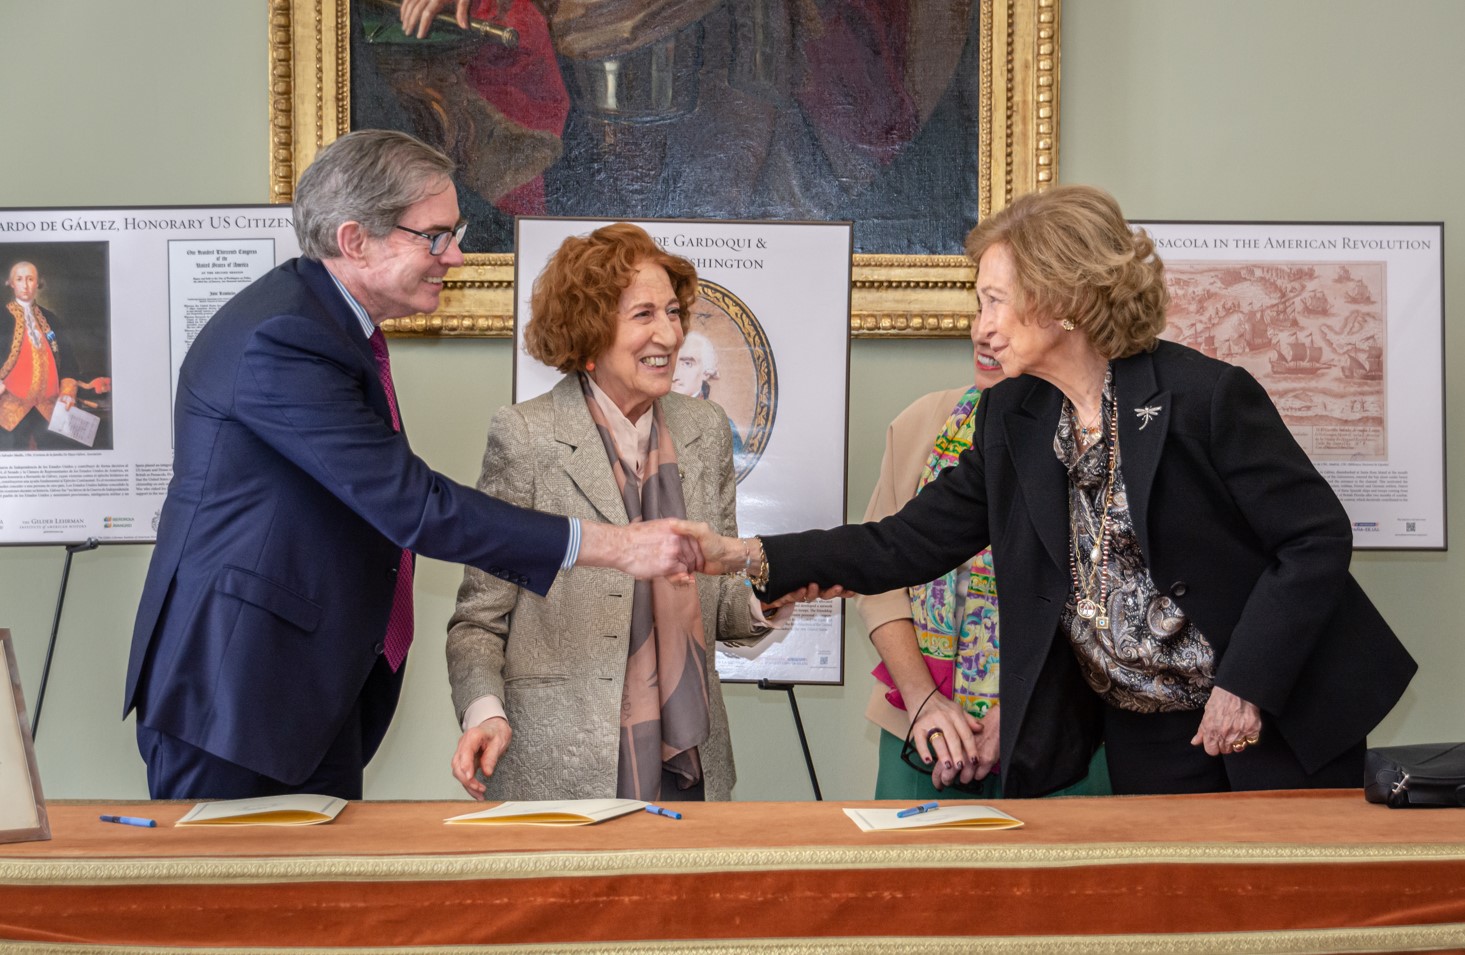 Gilder Lehrman President James G. Basker; Carmen Iglesias, Director of the Royal Academy of History; and Her Majesty Queen Sofia of Spain